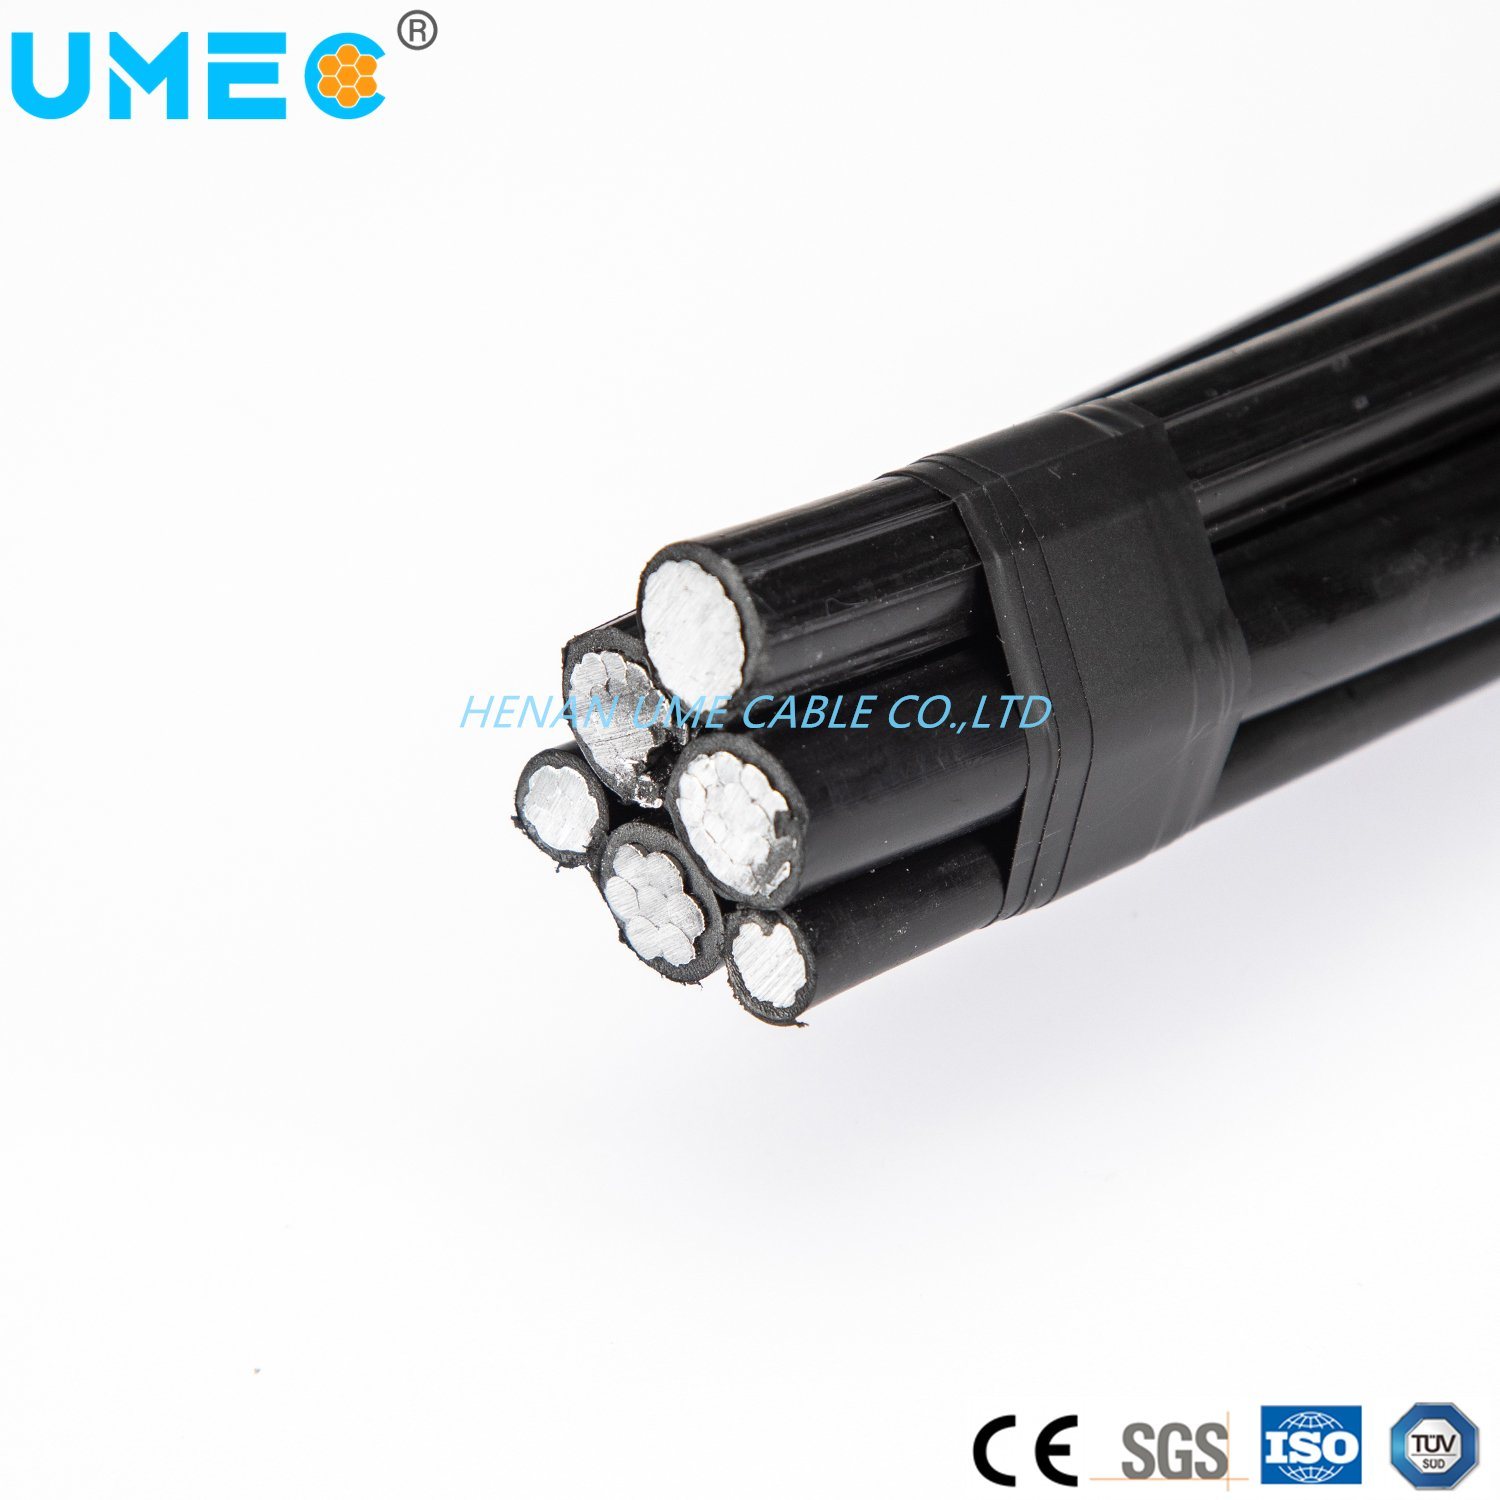 0.6/1kv ABC Cable Overhead Transmission Line Aerial Bunched Caai Cable / Self-Supporting Cable